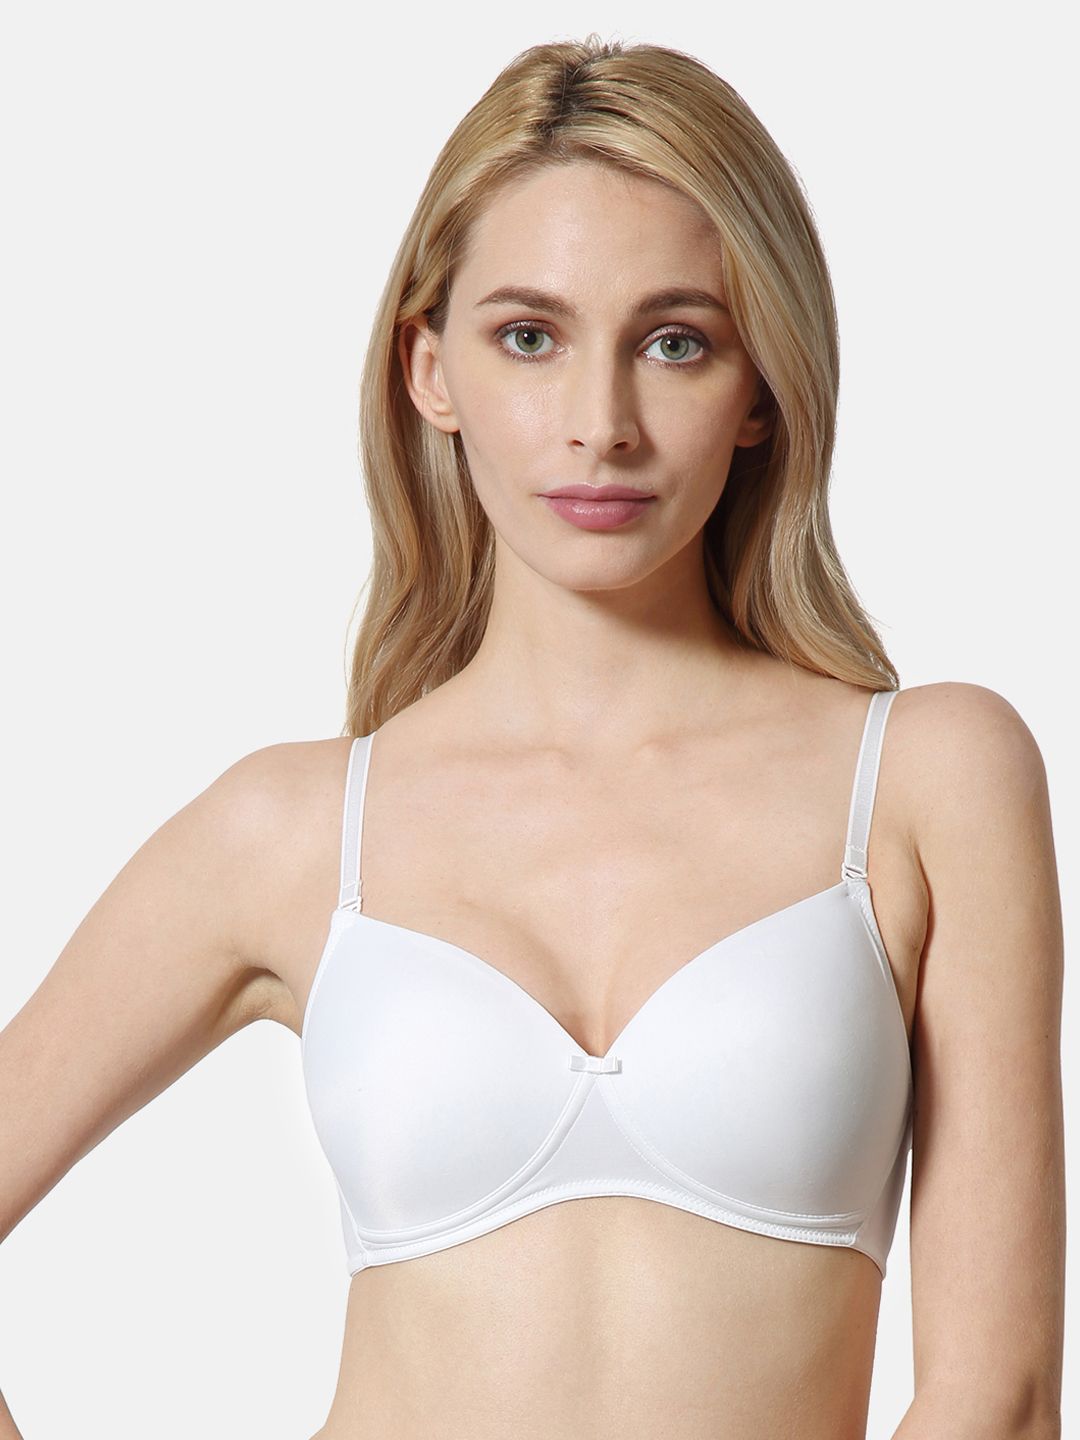 Van Heusen White Solid Non-Wired Lightly Soft-Cup Padded T-shirt Bra ILIBRALXSWH22001 Price in India